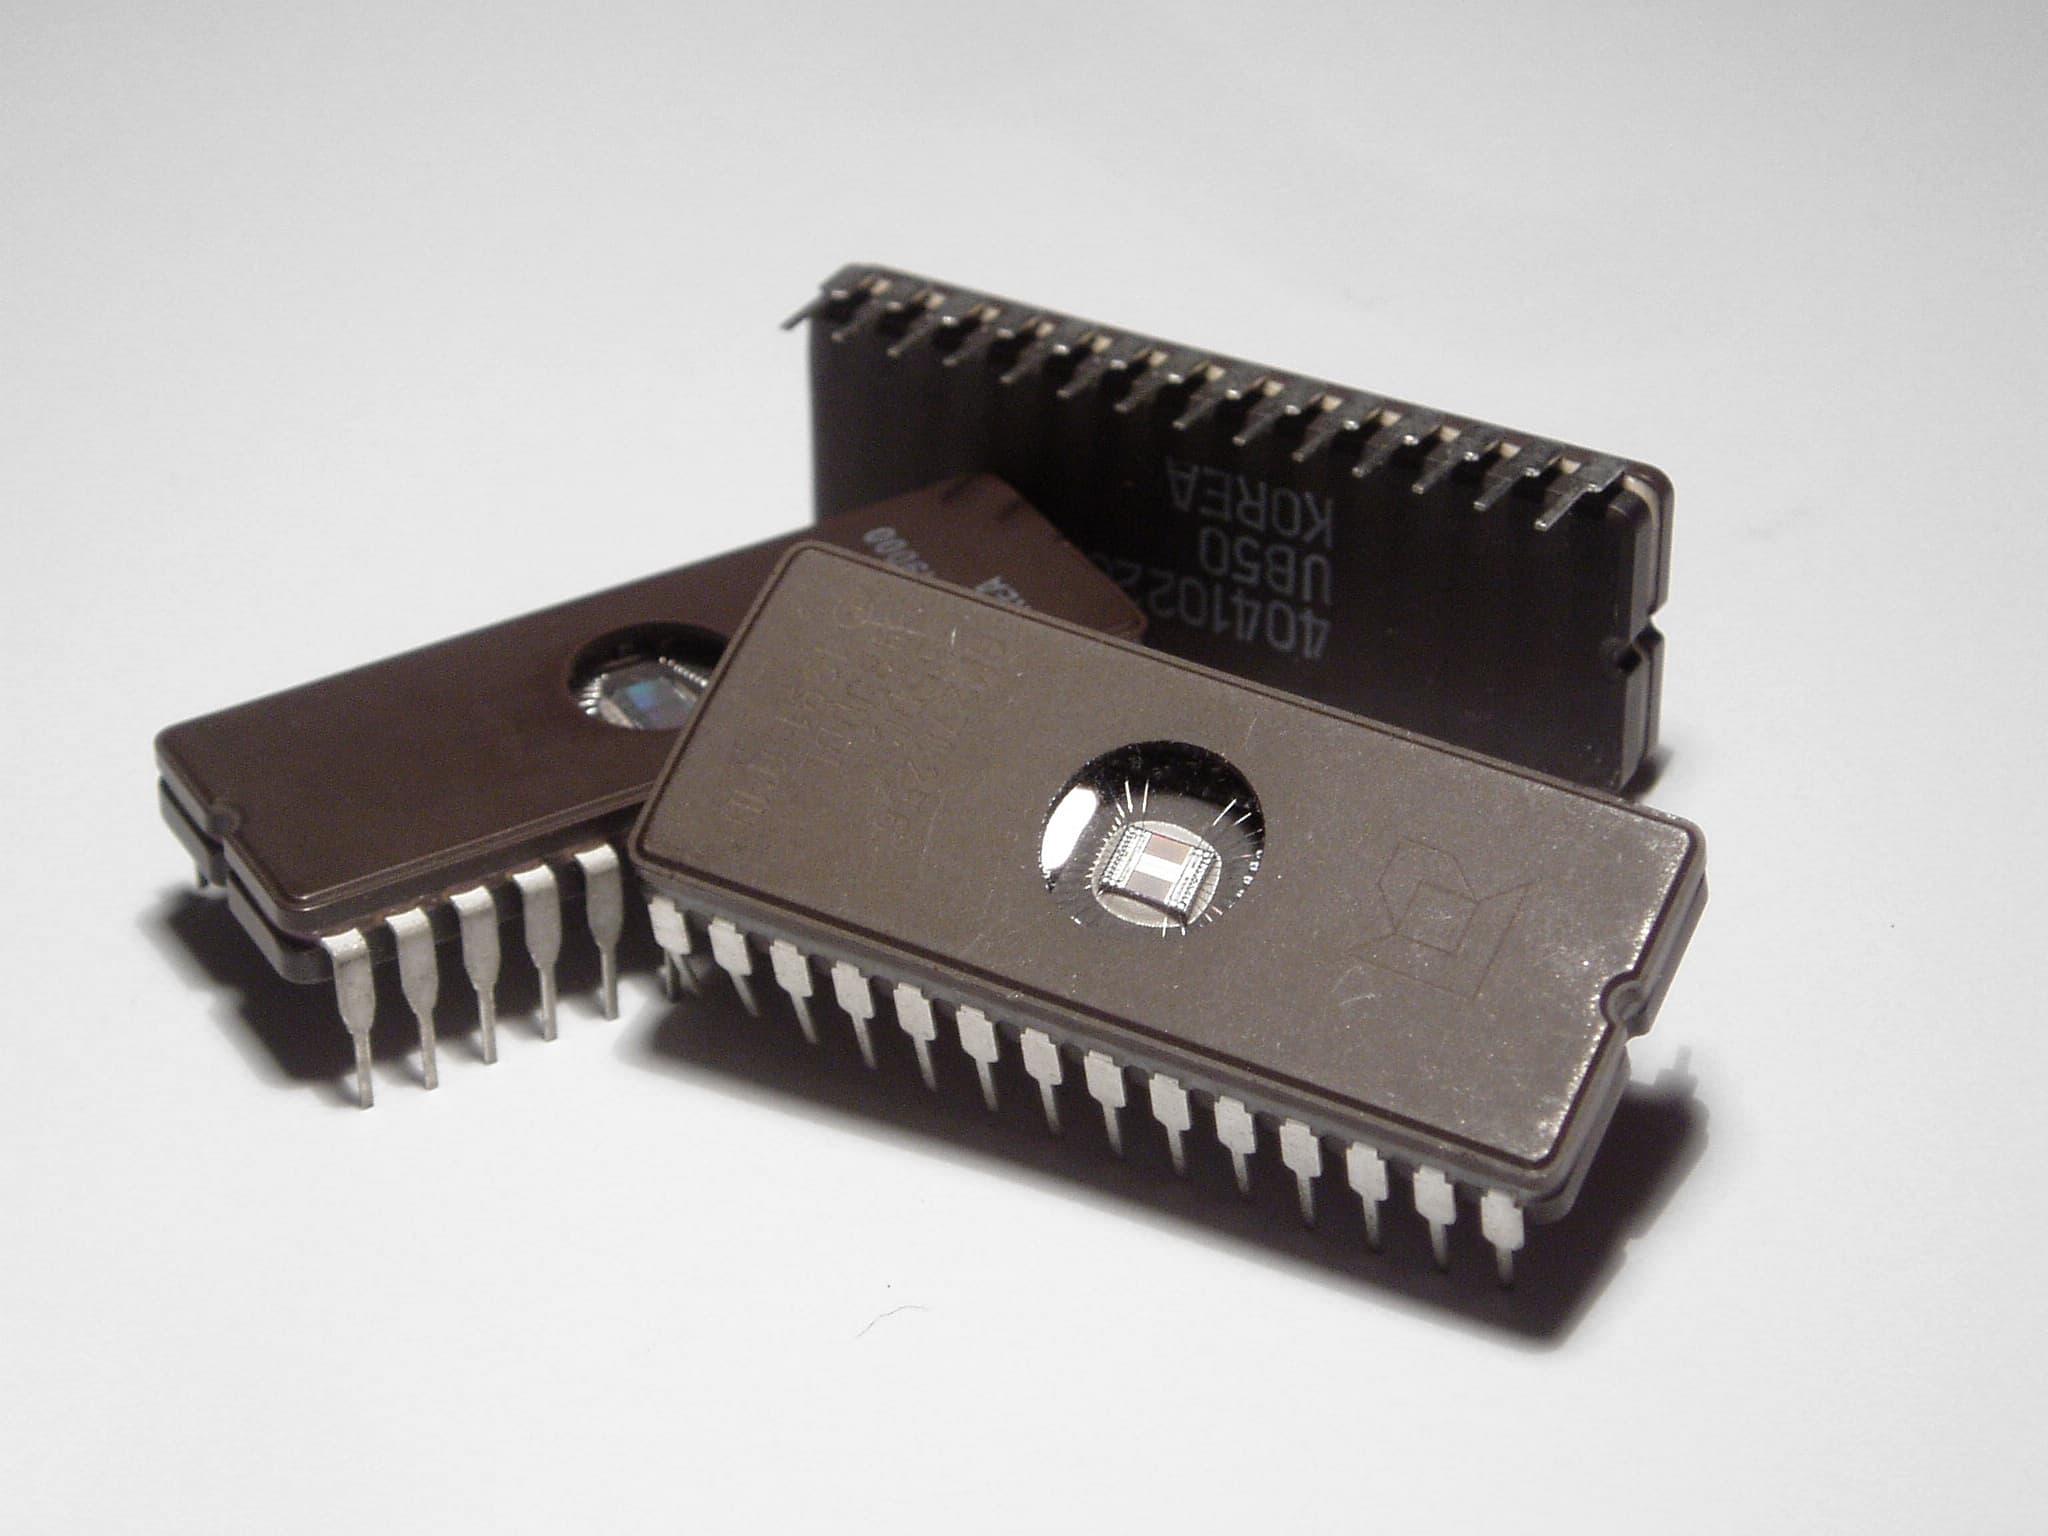 Close up product shot of three EPROM chips, showing the tiny integrated circuit through a hole in the top